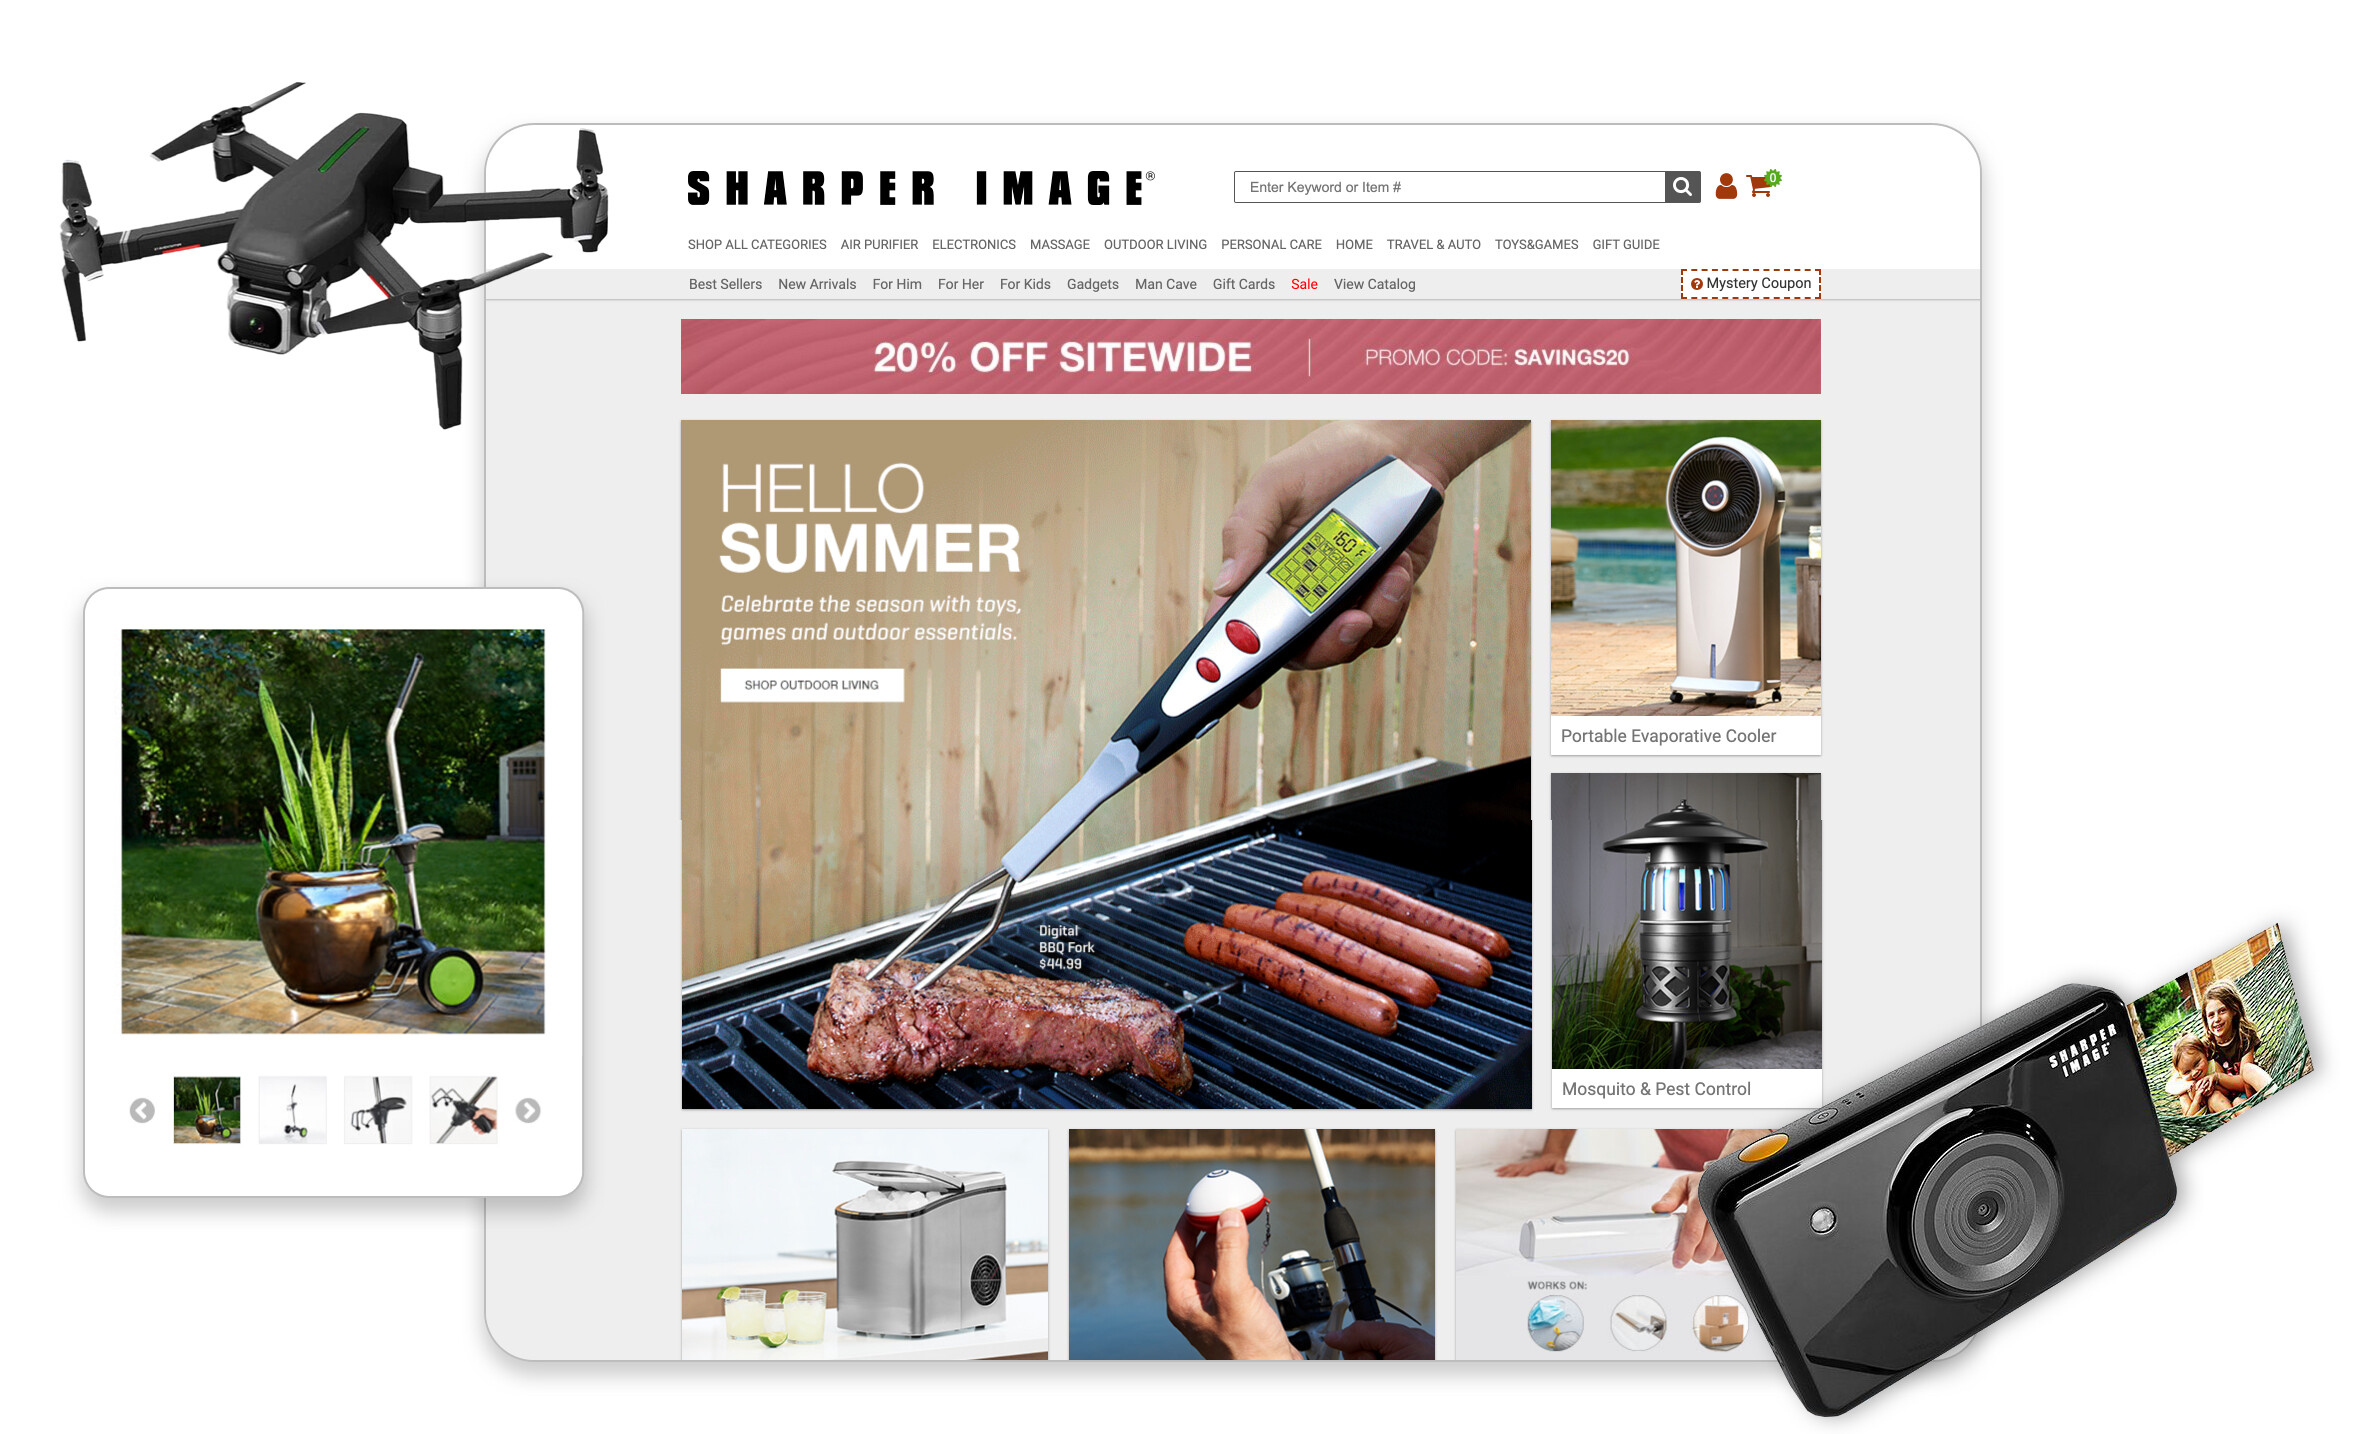 Sharper Image's digital commerce can effortlessly scale during traffic peaks and aids business growth